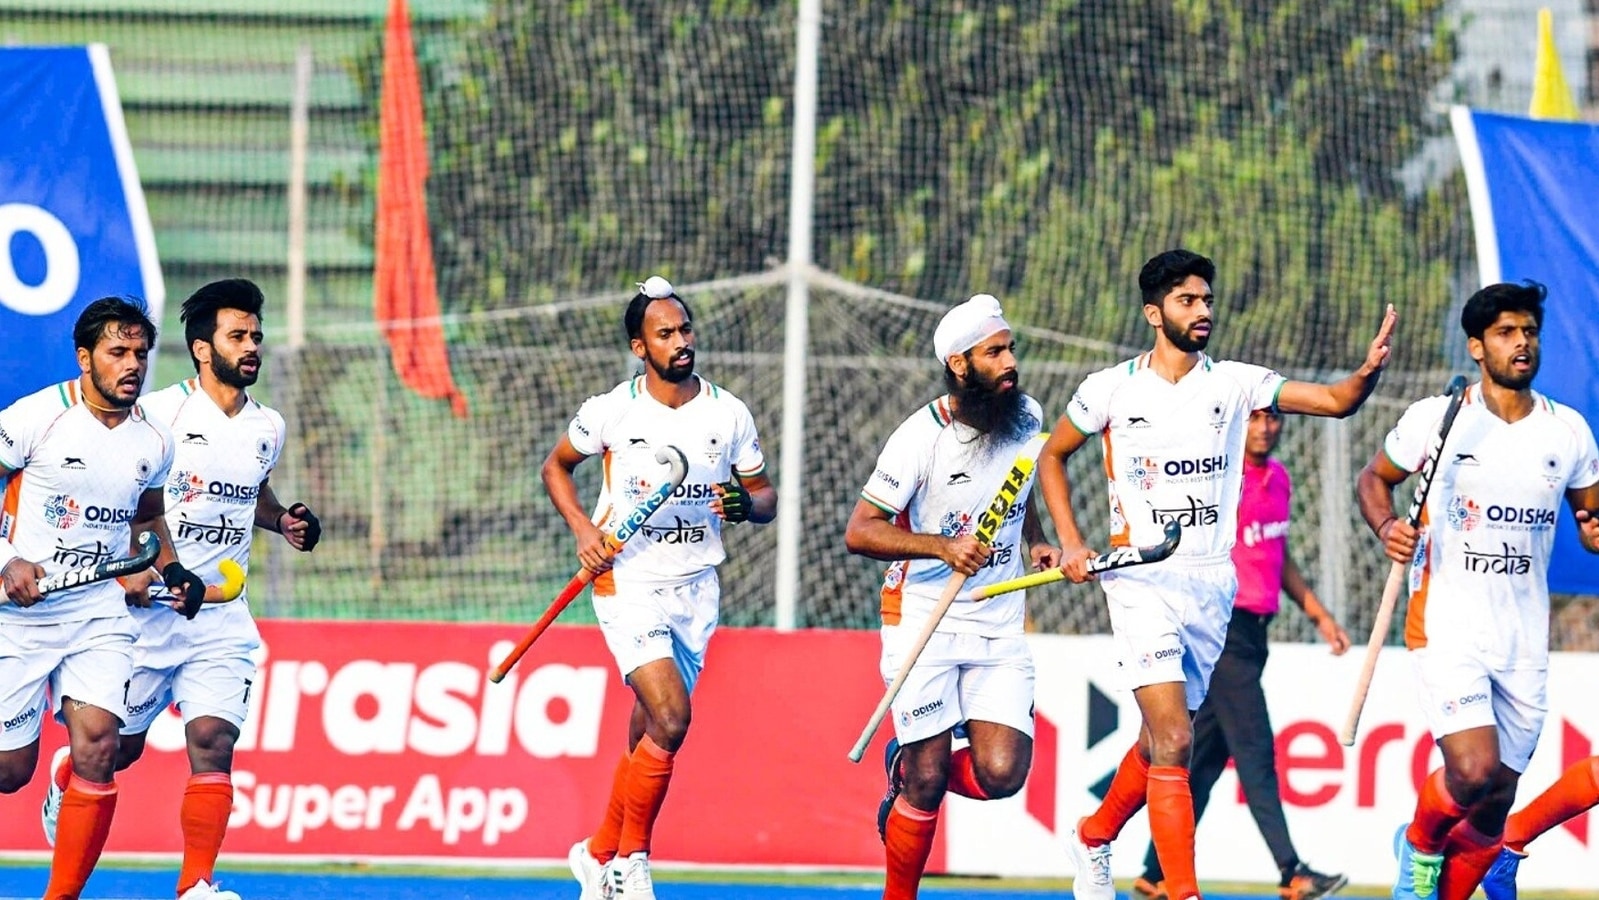 After another Asian Champions Trophy title, Indian hockey team driven by  greater challenges : The Tribune India